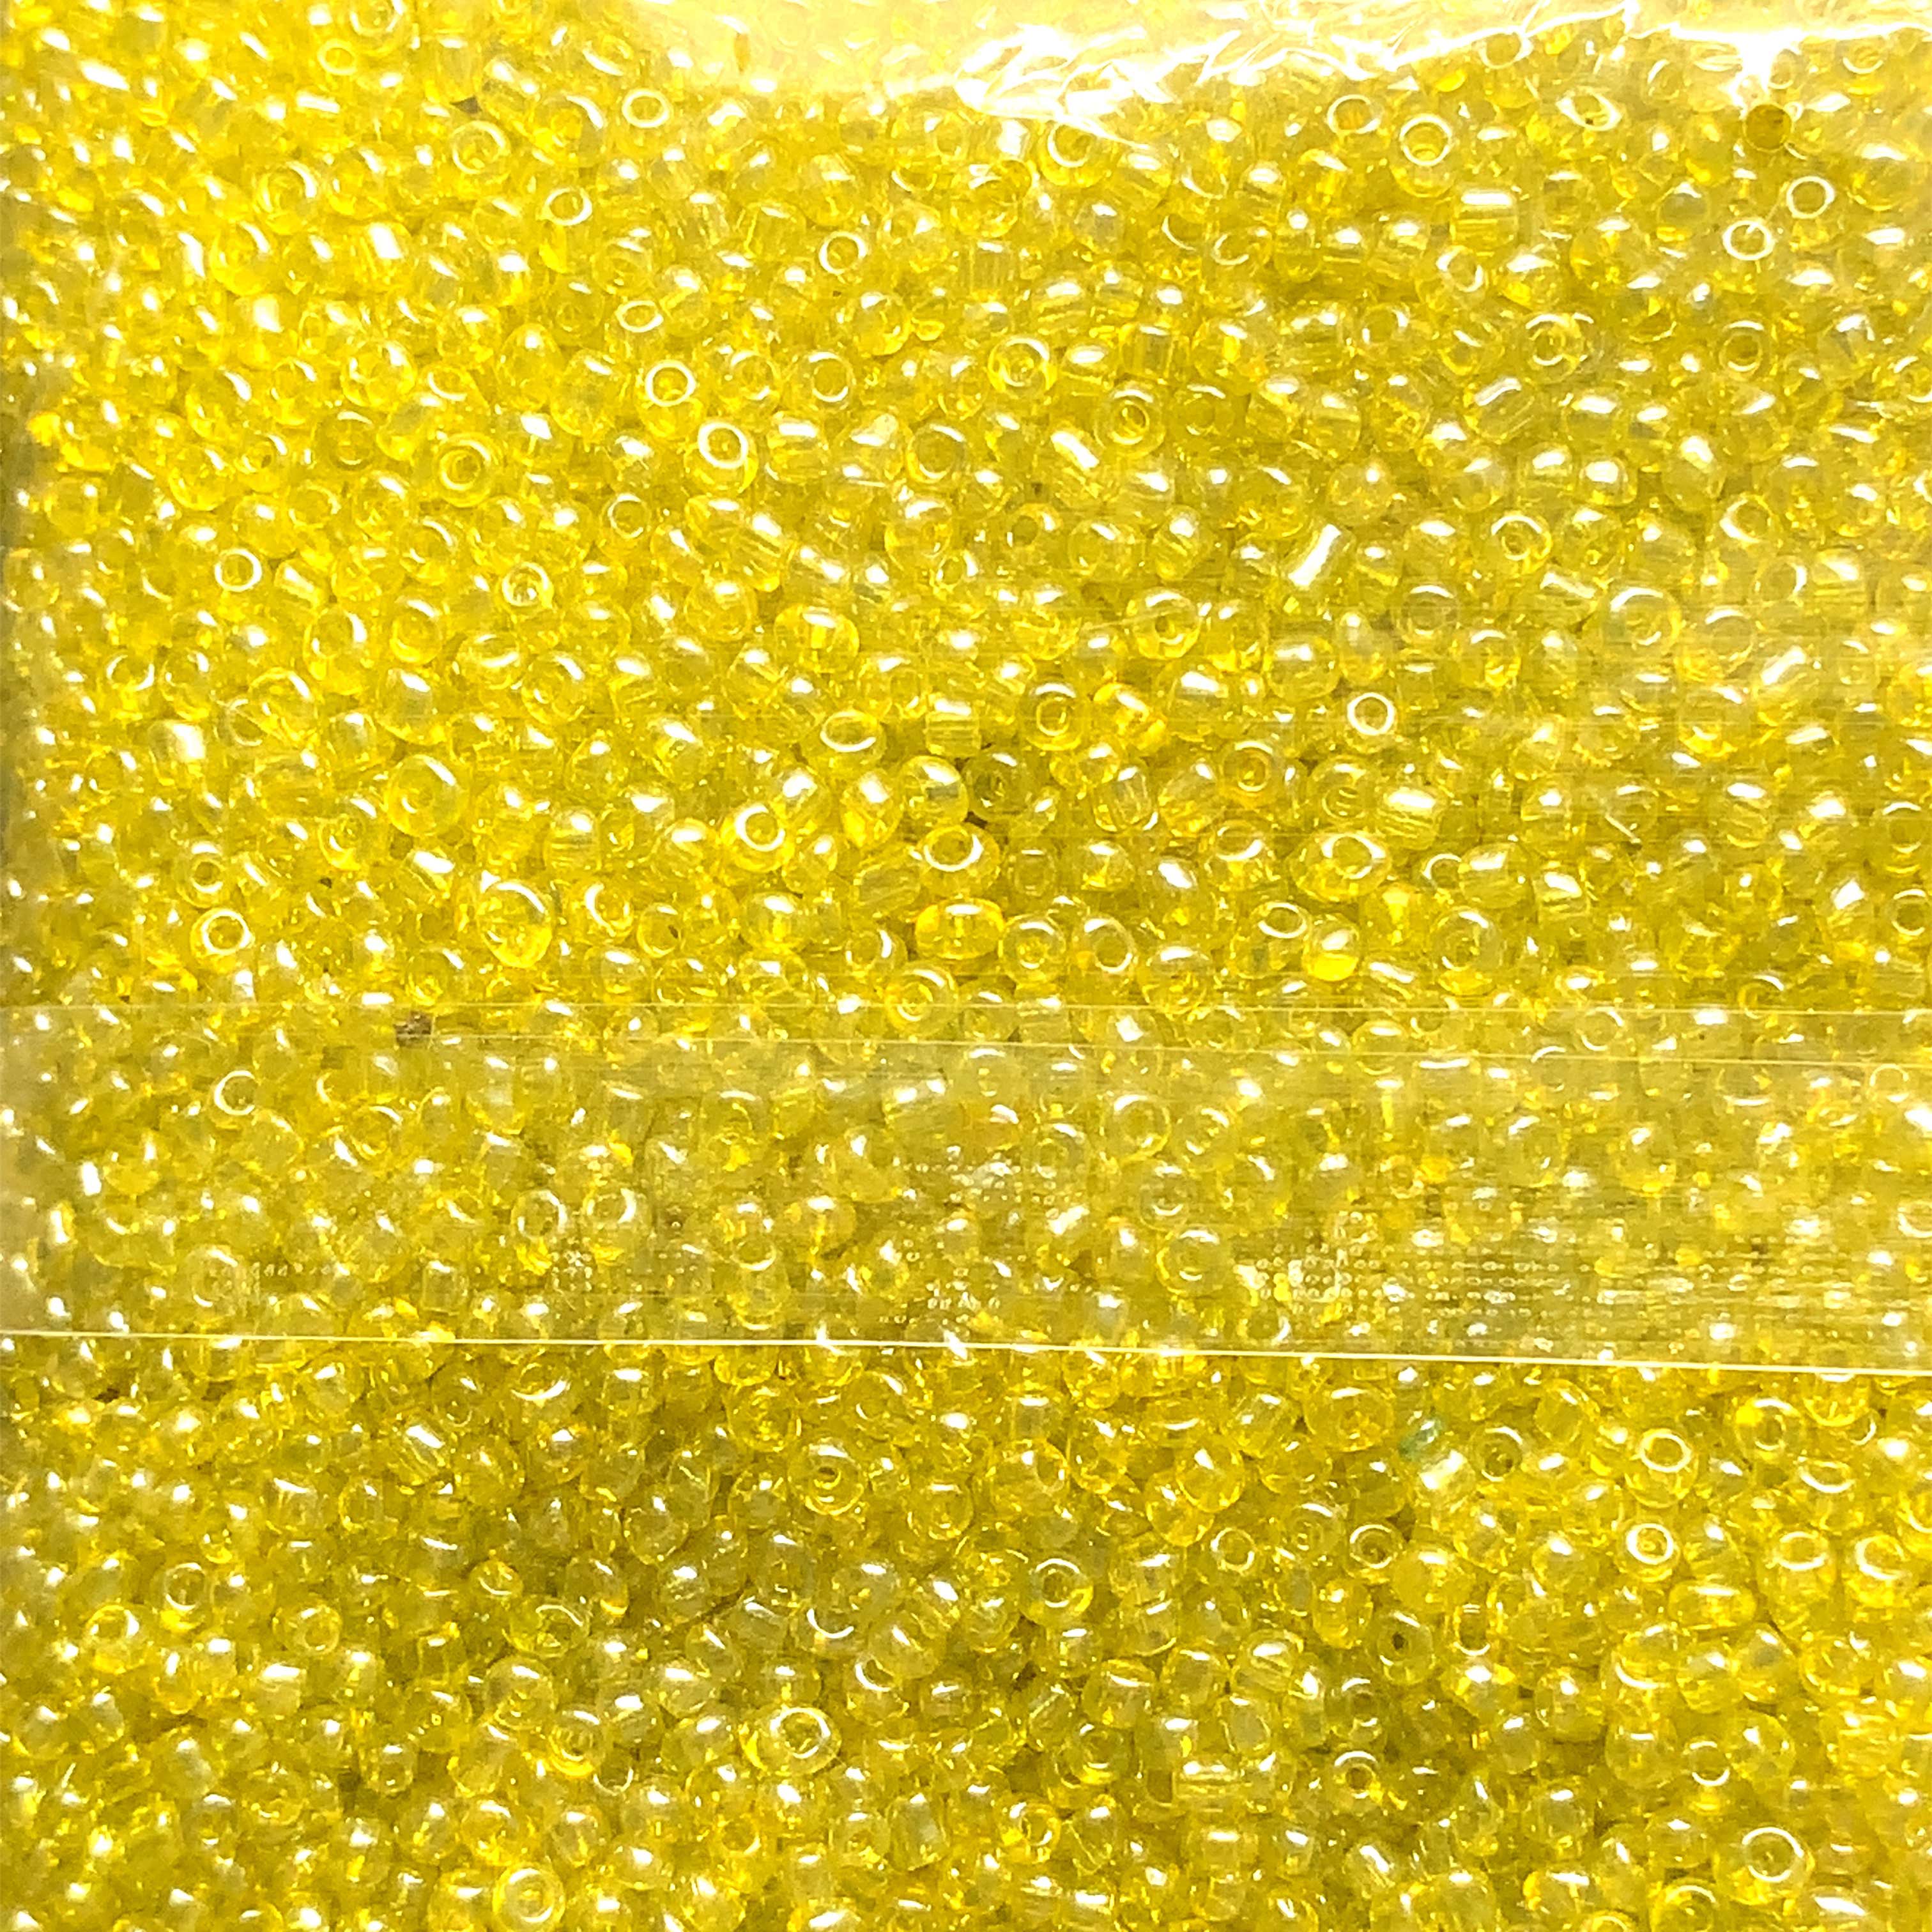 2mm Translucent Yellow Glass Seed Beads  - 400g Per Bag